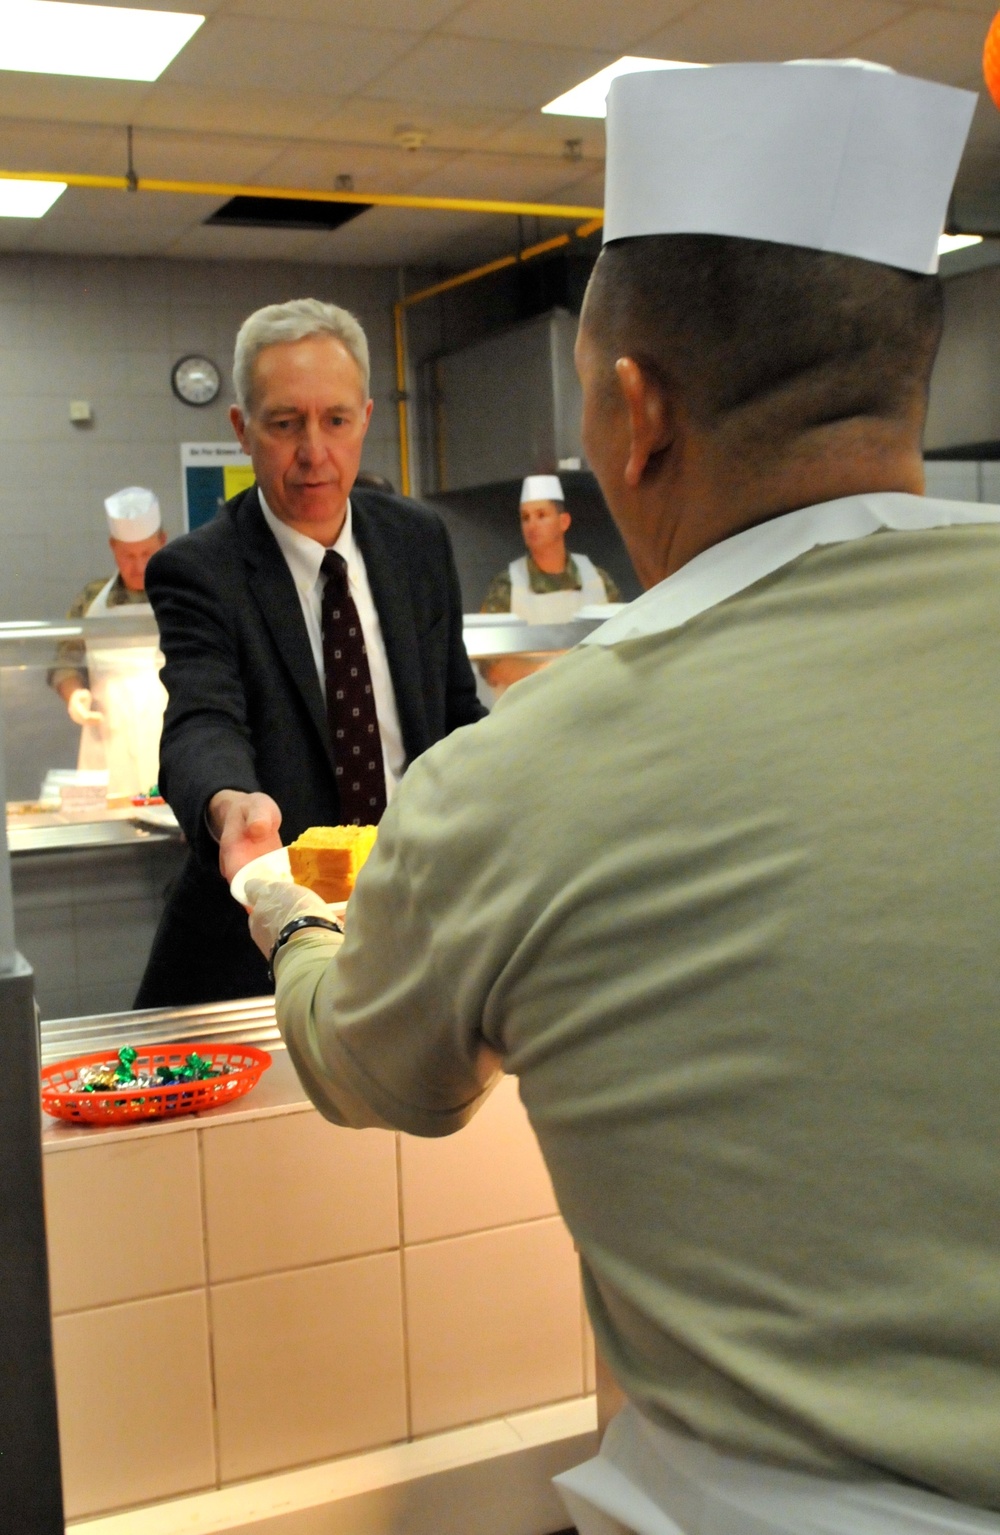 US ambassador to Romania serves soldiers on Thanksgiving